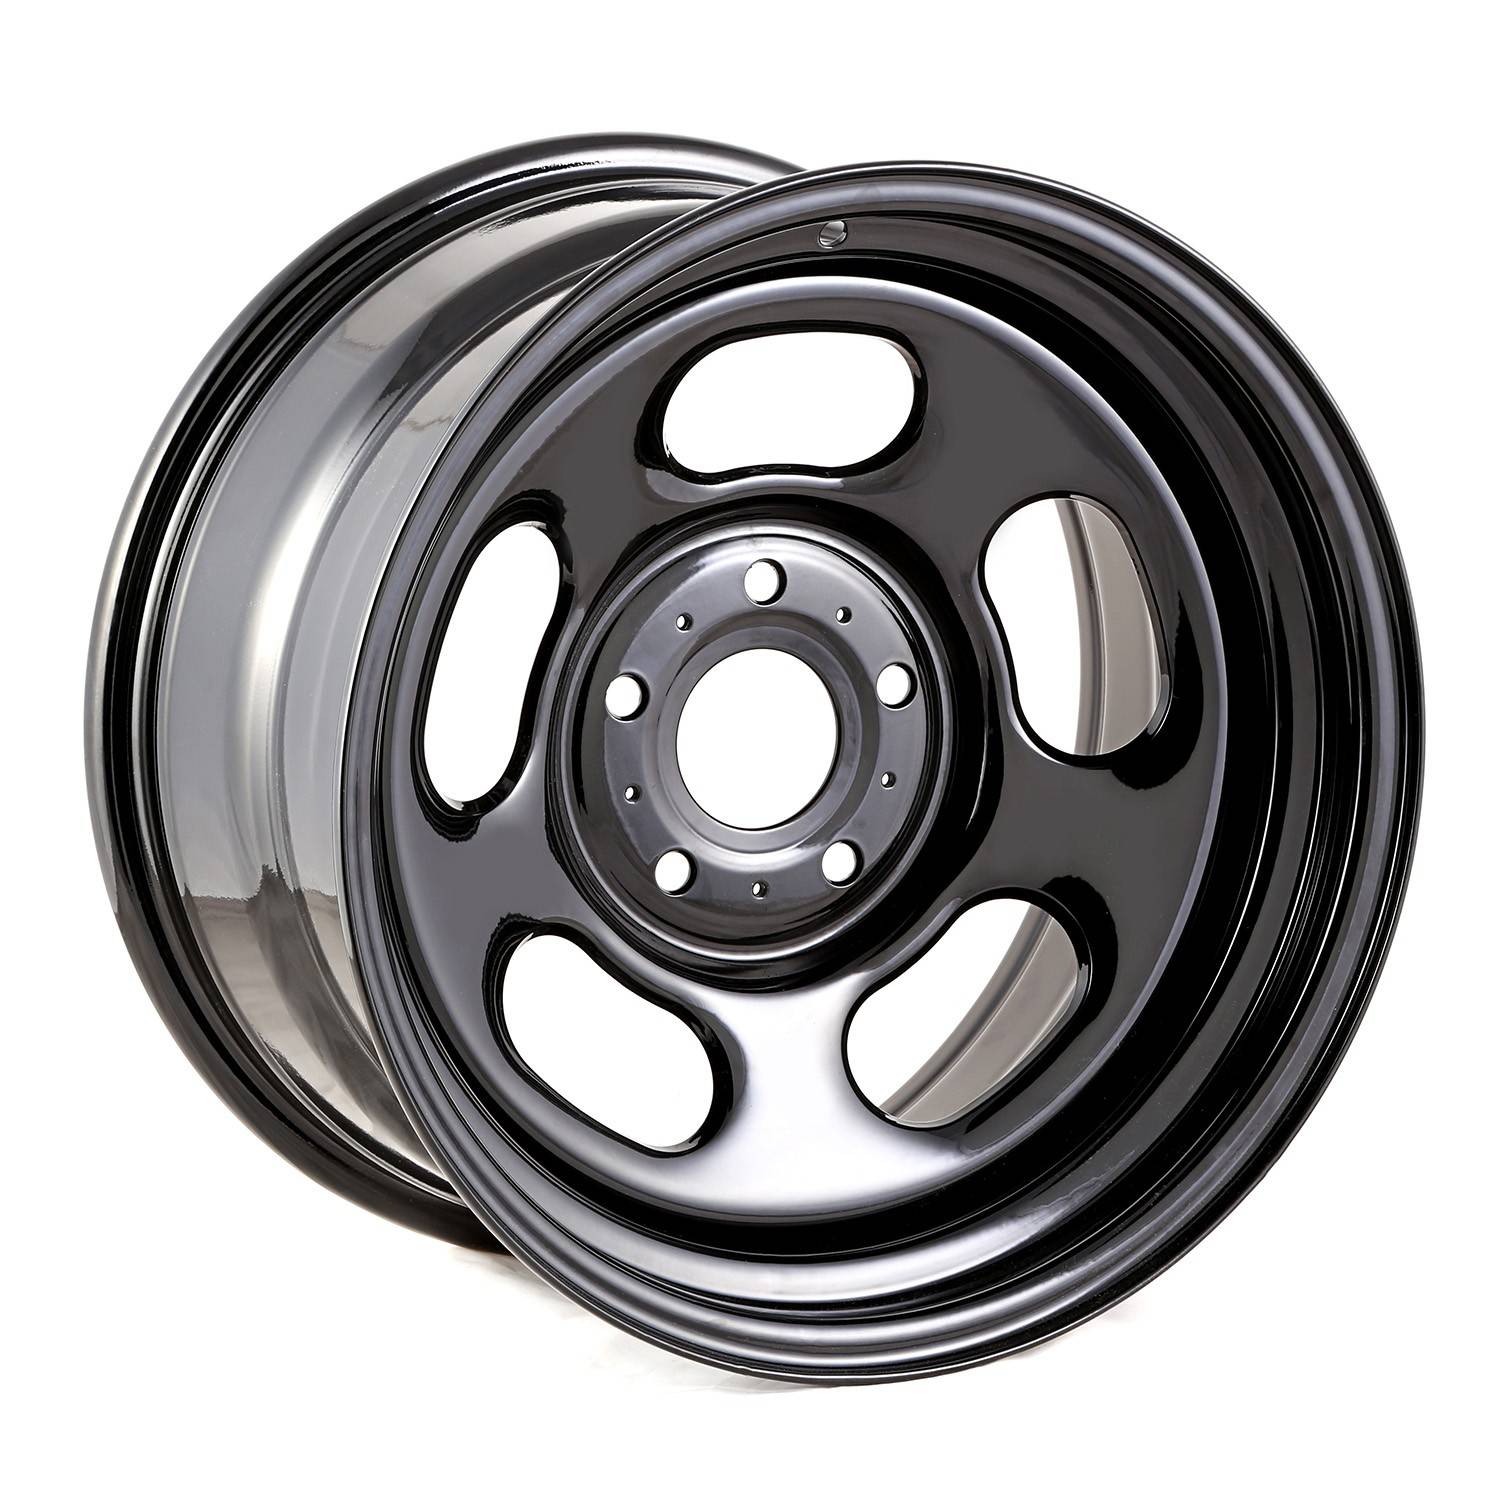 Types Of Wheels Explained: Alloy, Steel And Chrome